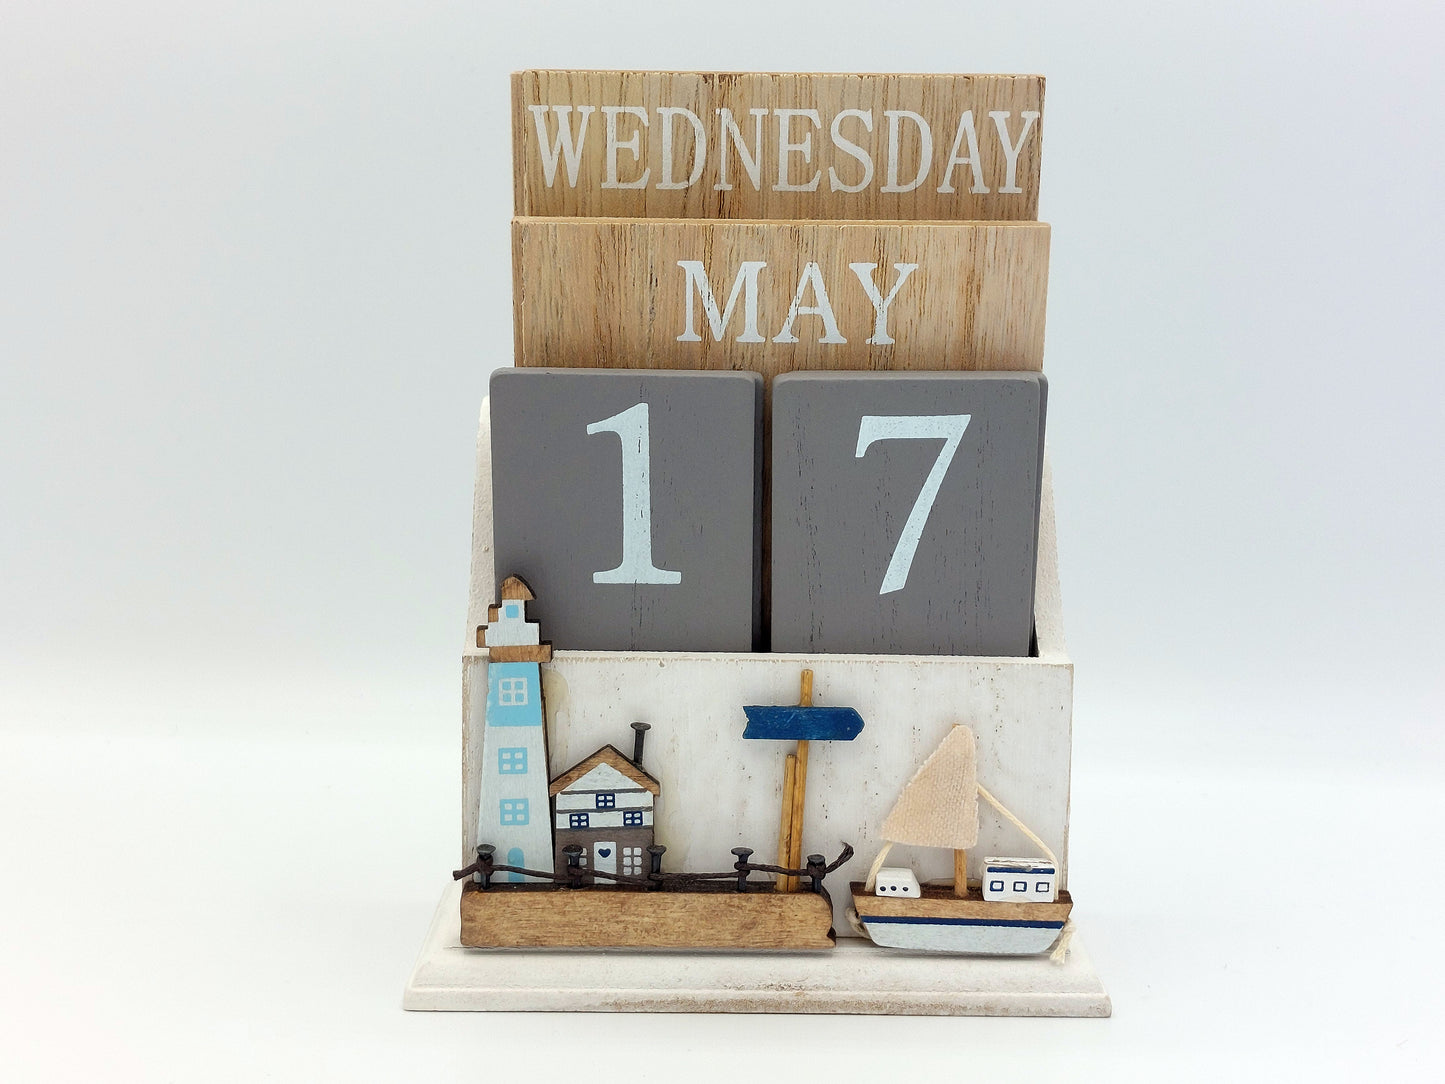 Beach House Retro Painted Wooden Calendar with Boats in 2 styles